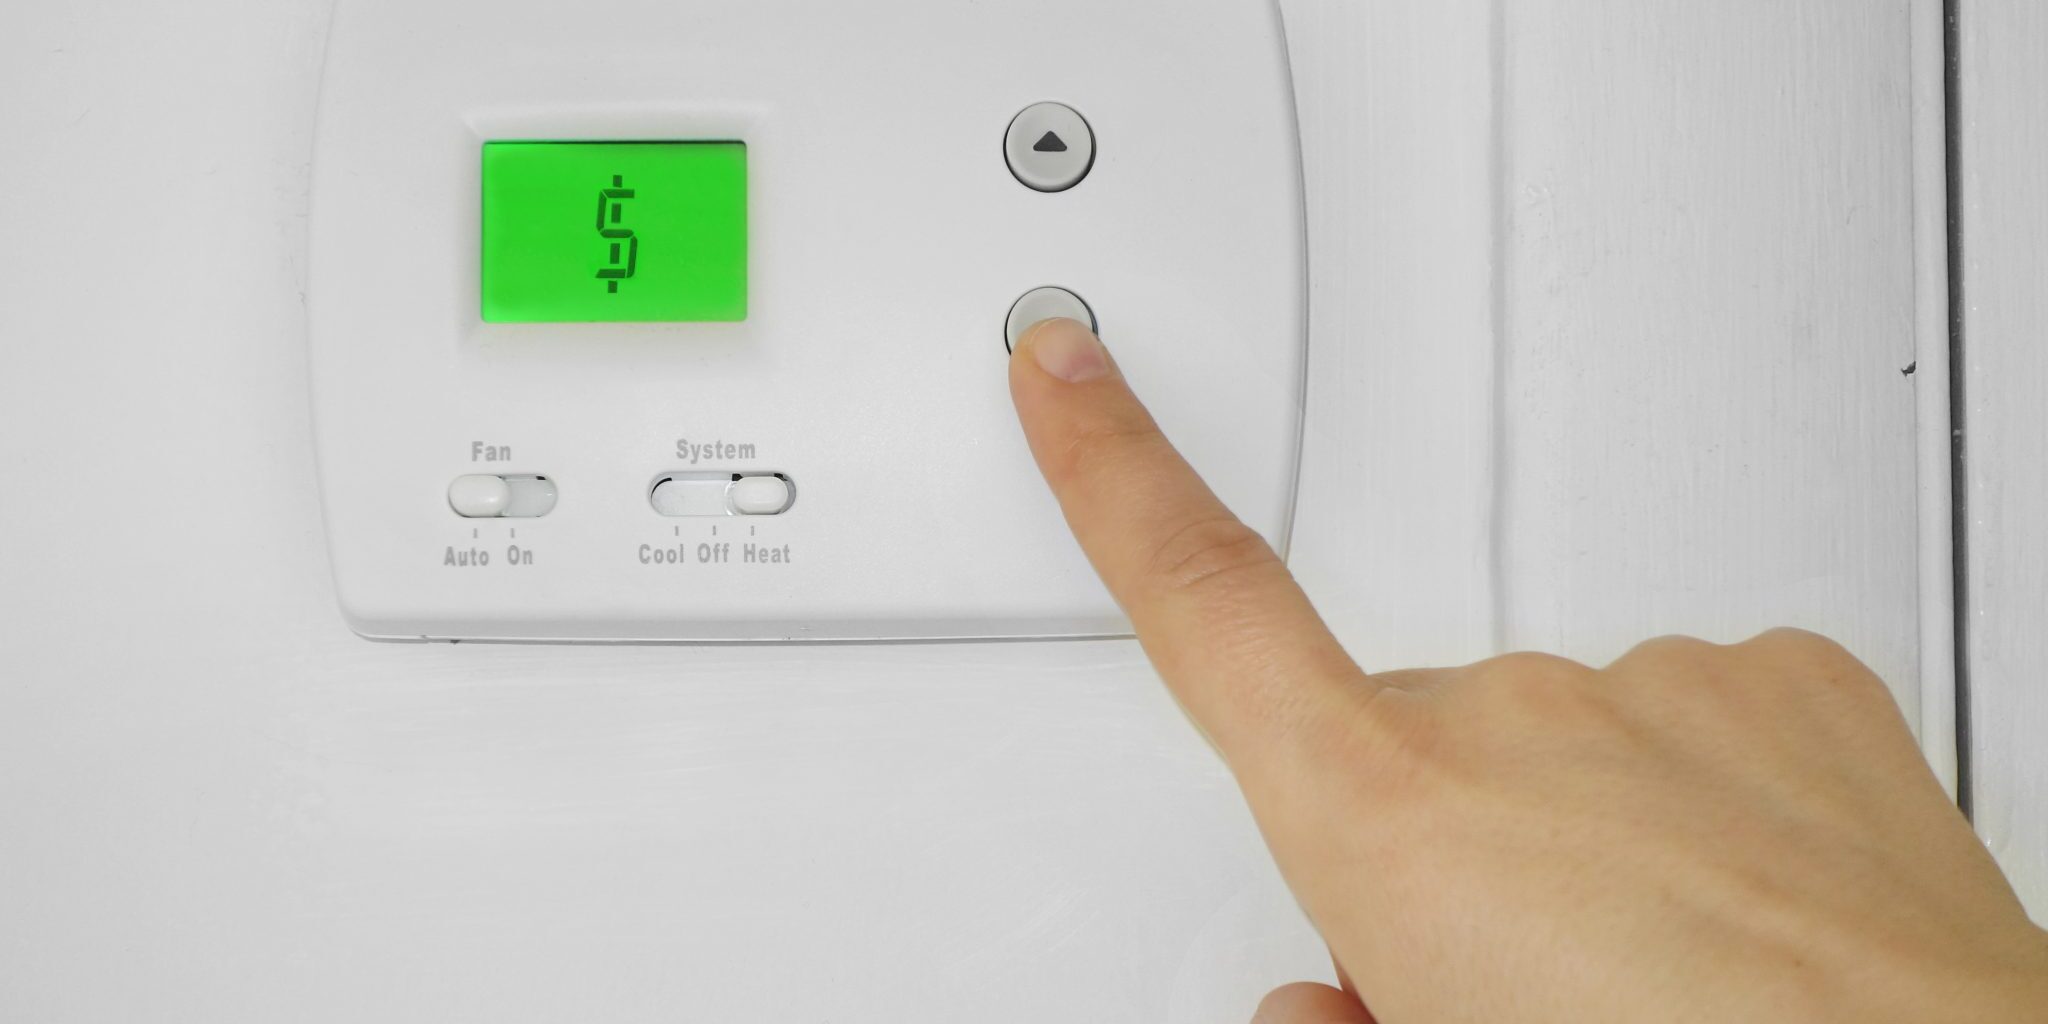 Person adjusting a wall thermostat with dollar sign symbol on the display